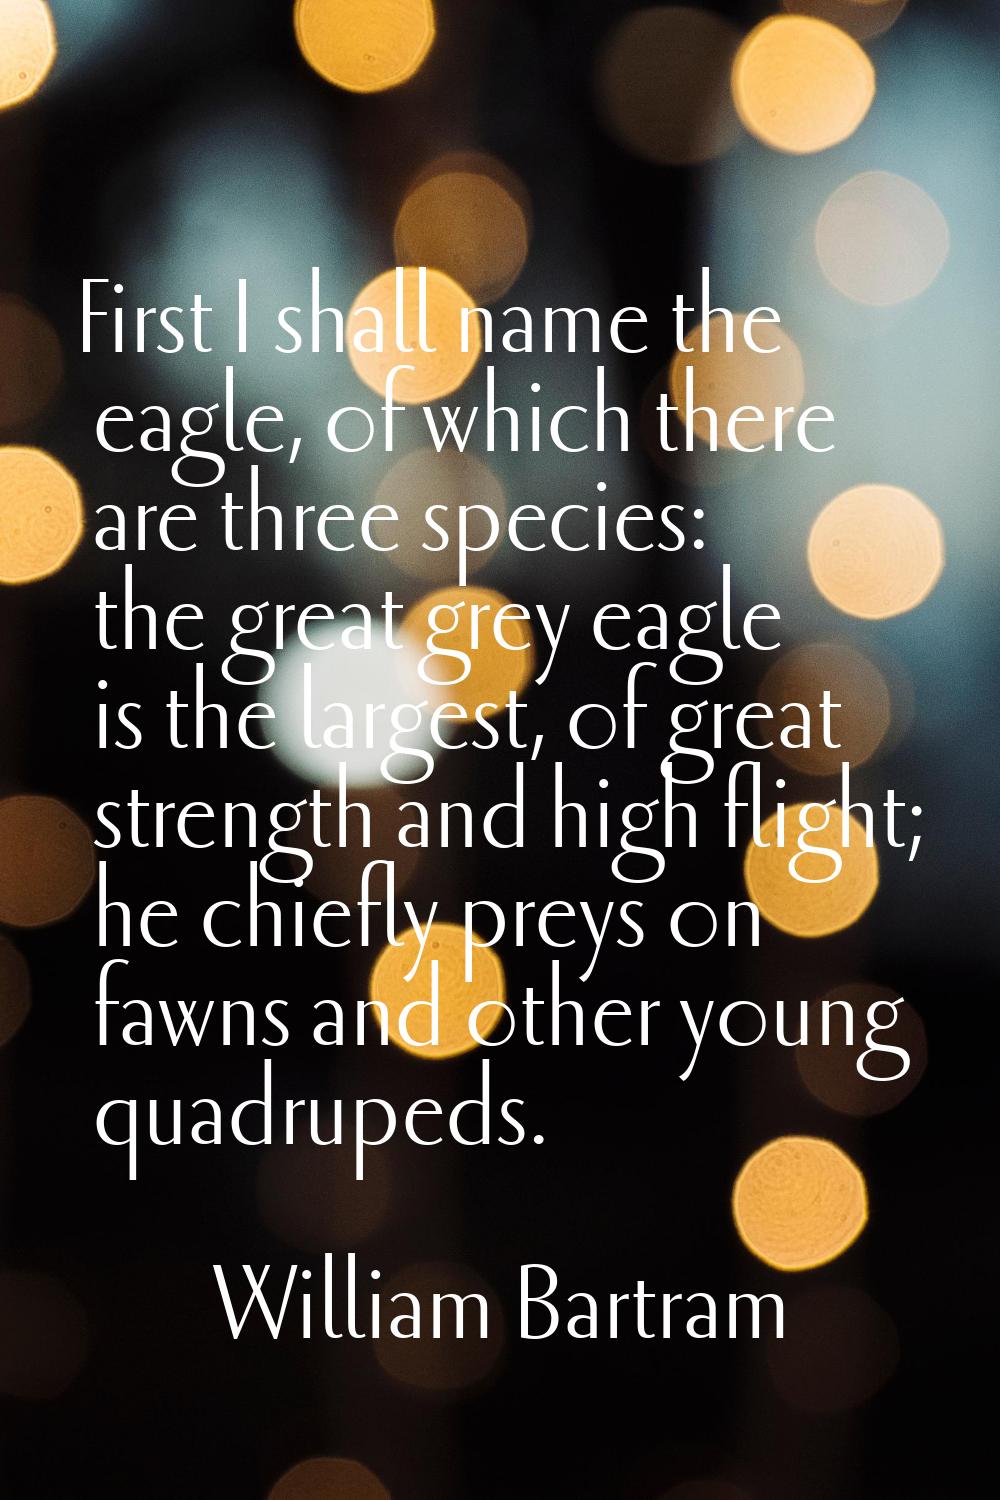 First I shall name the eagle, of which there are three species: the great grey eagle is the largest